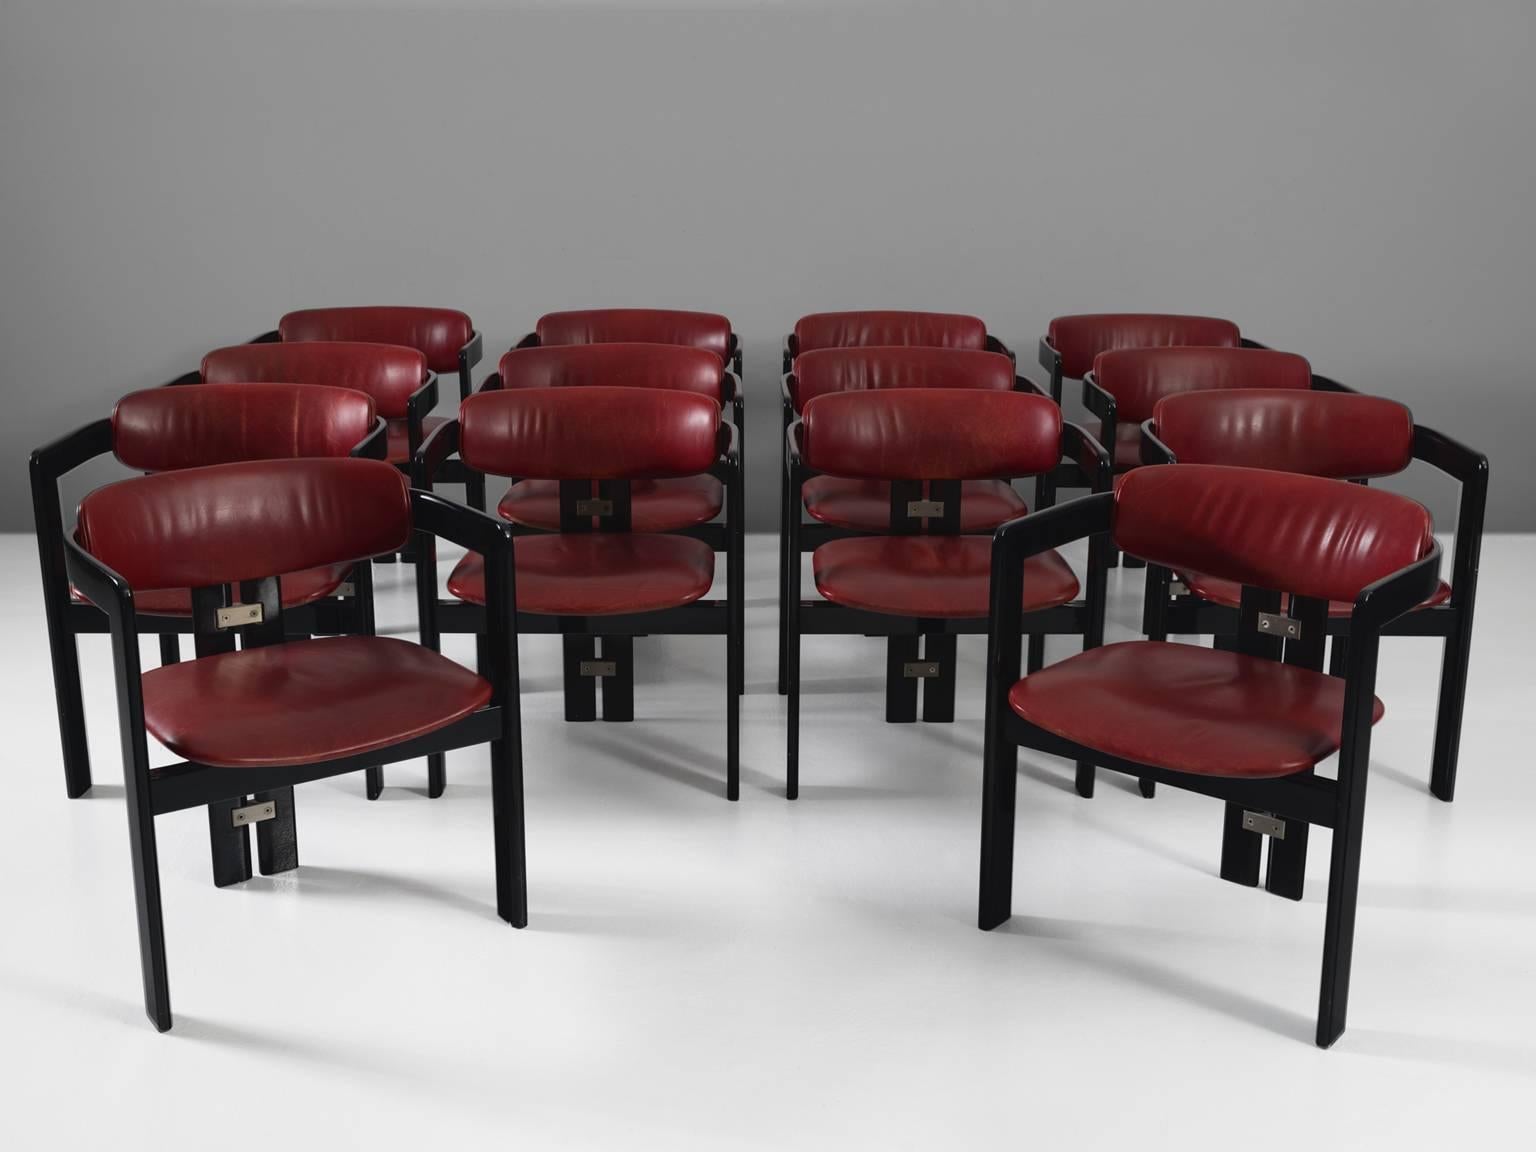 Set of 14 'Pamplona' dining room chairs, in wood and leather by Augusto Savini for Pozzi, Italy, 1965. 

Large set of 14 armchairs in high gloss black lacquered wood and red leather upholstery. A characteristic design; simplistic yet very strong